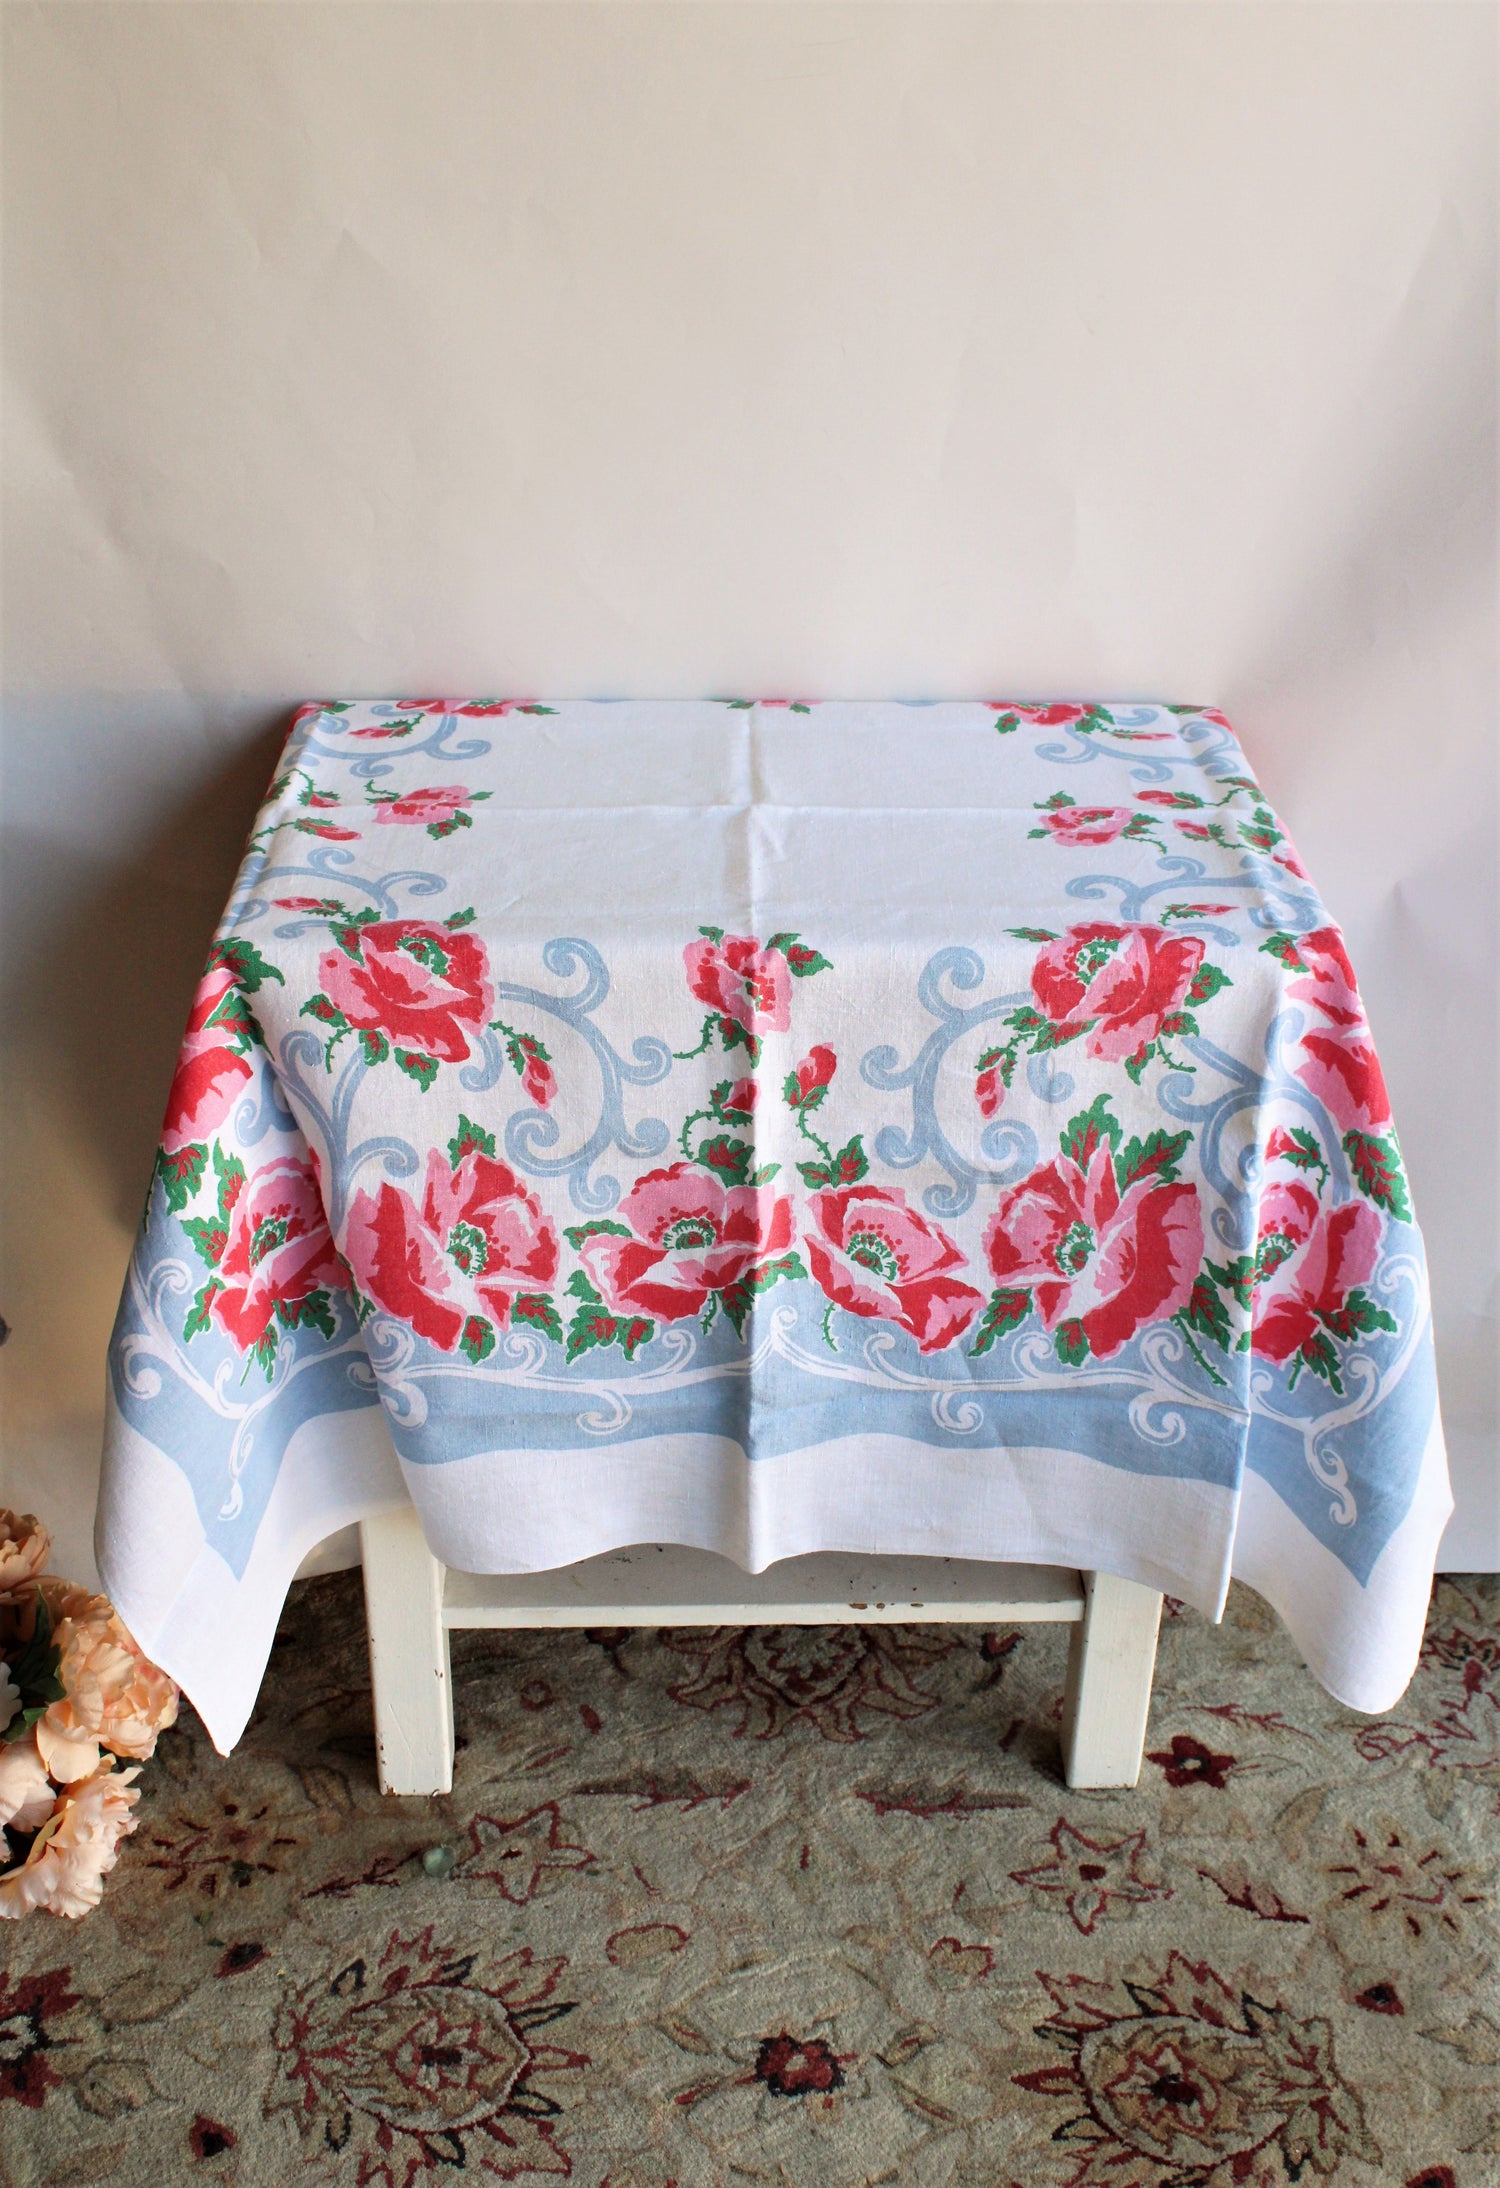 Vintage 1940s 1950s Linen Tablecloth with Rose Print